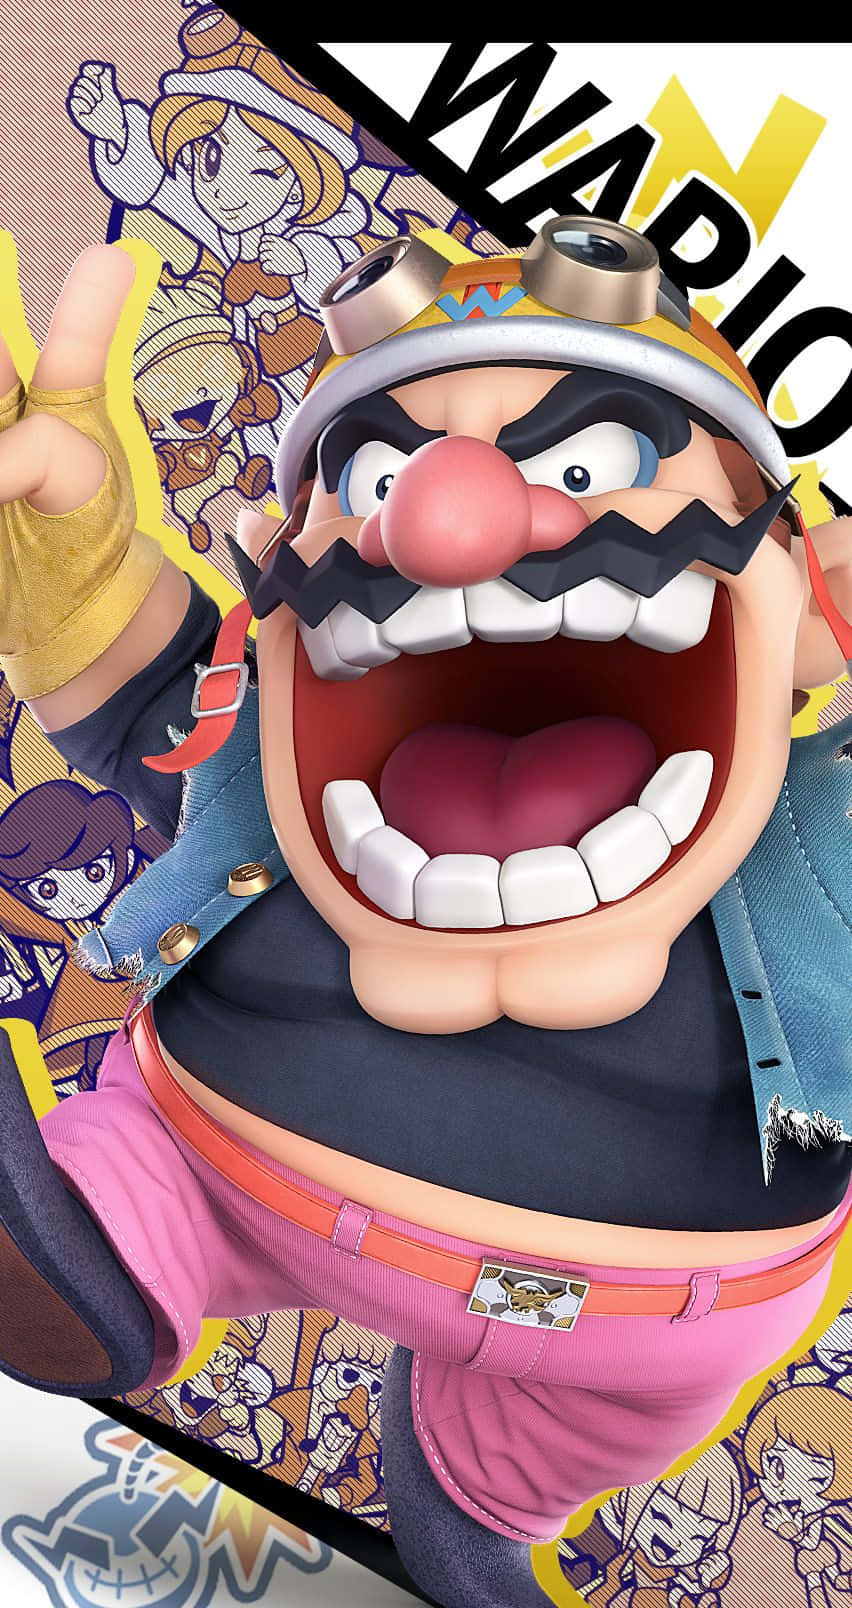 Gamer's Delight - Wario In Action! Background